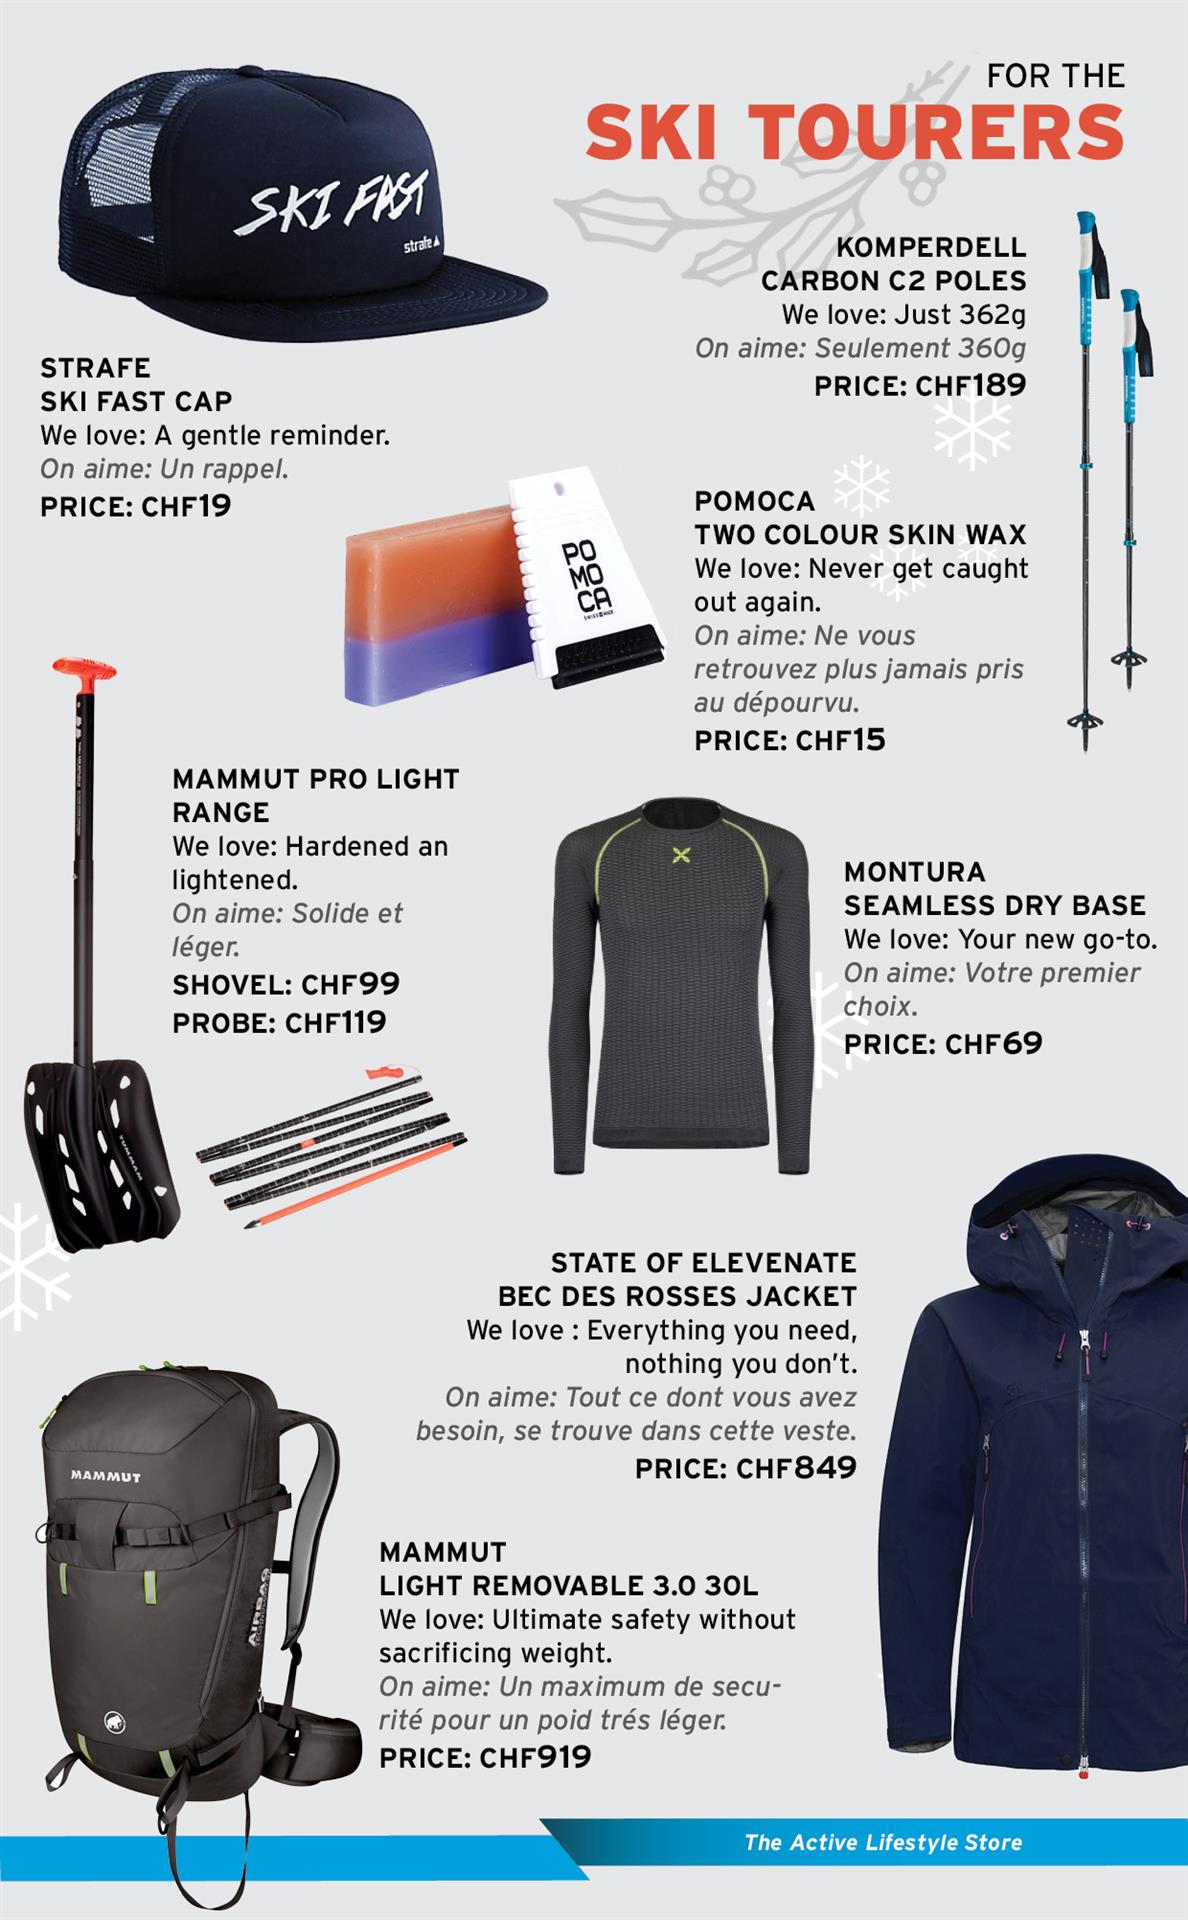 Gifts for the ski tourers